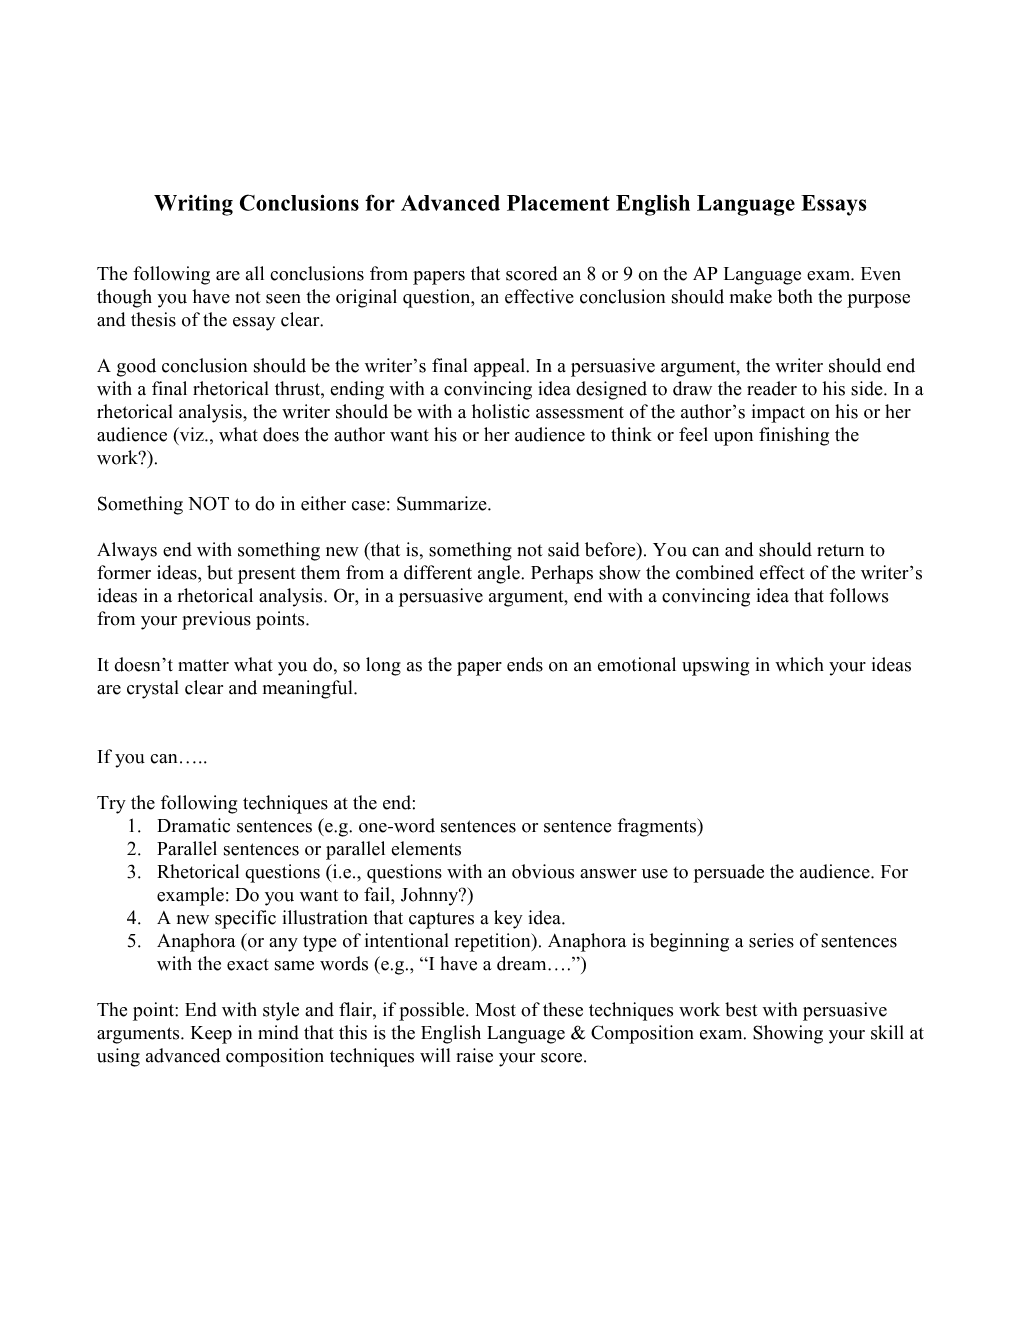 Writing Conclusions for Advanced Placement English Language Essays